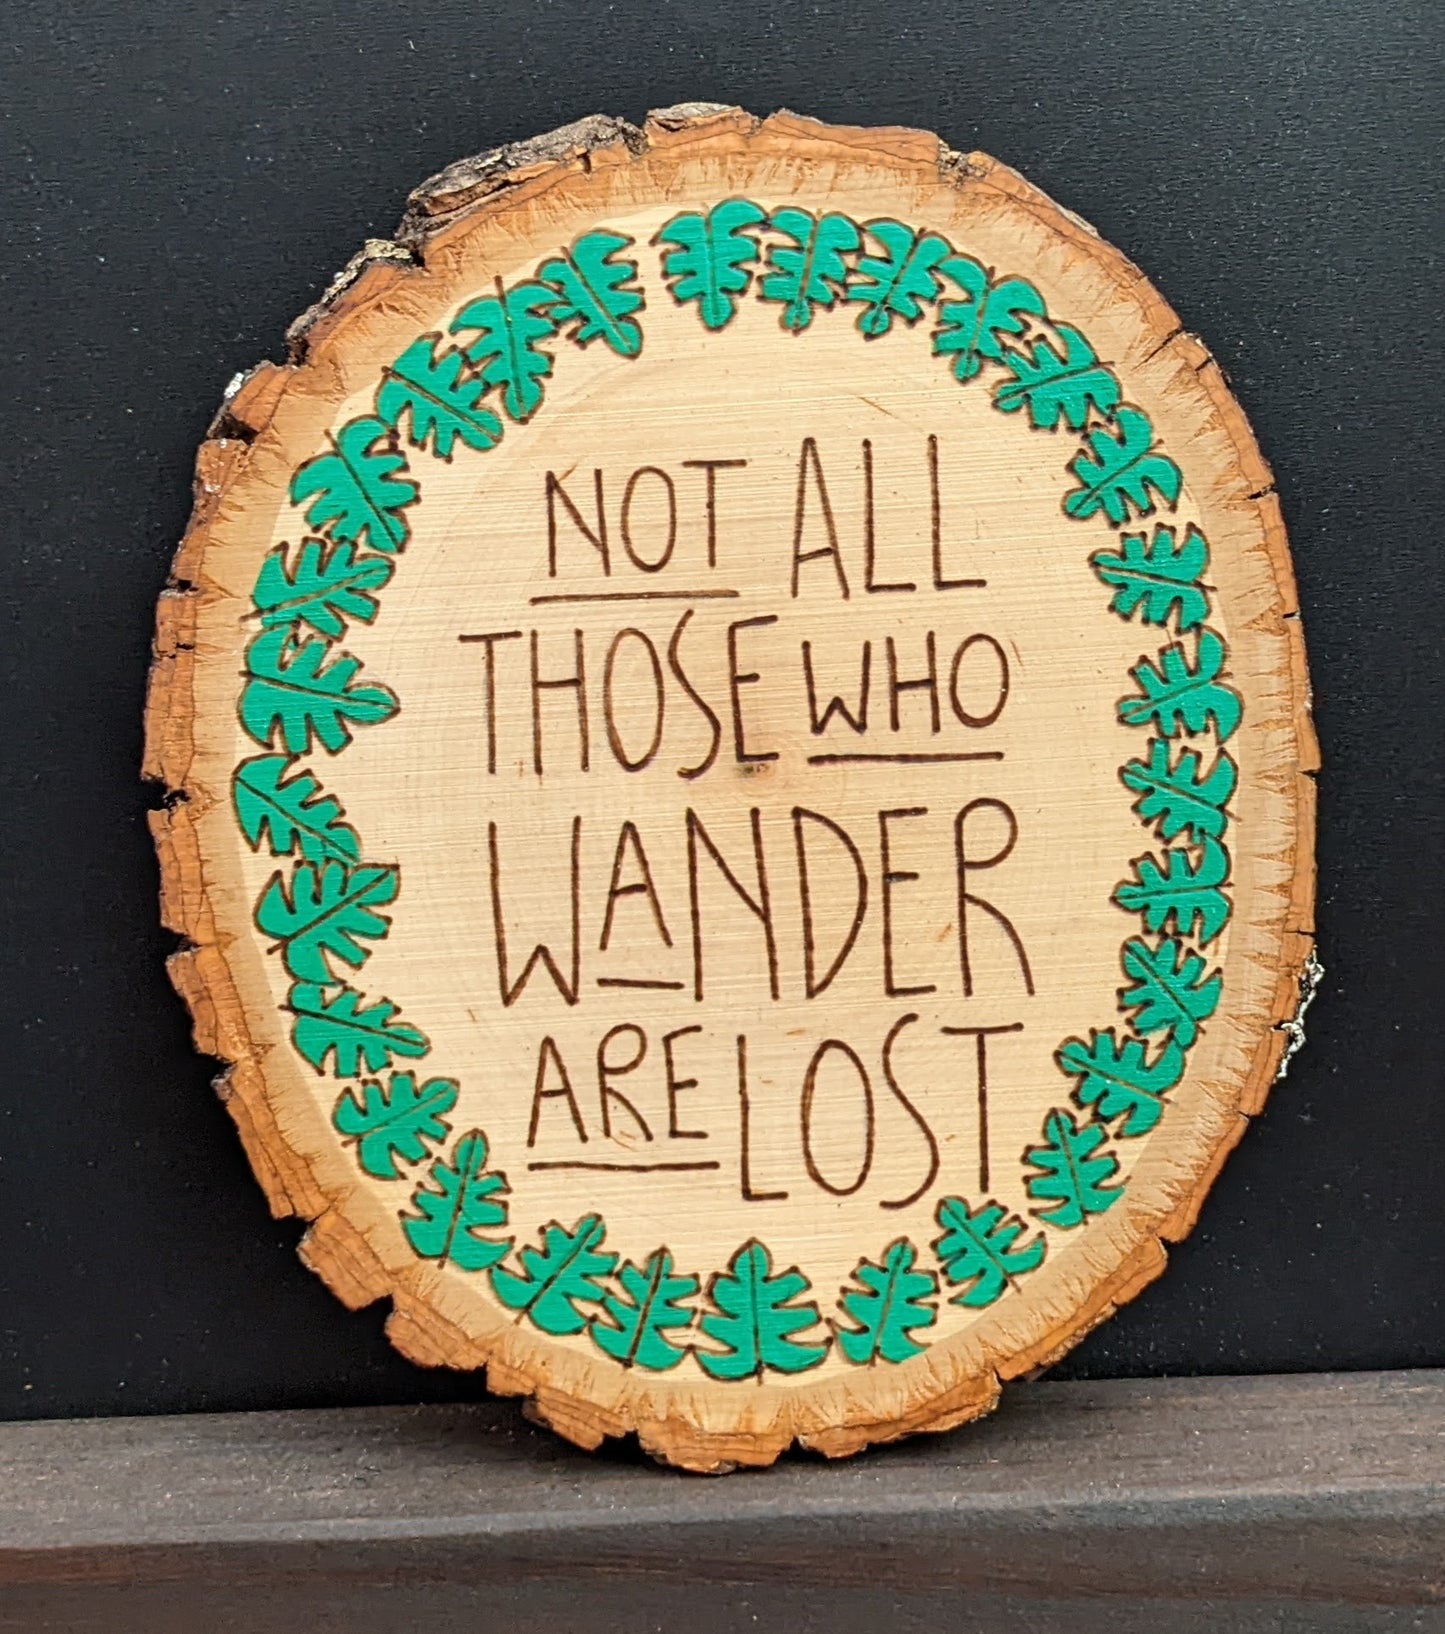 Wood burned Art by Wood Wanderlust round piece with plant border and text art reading Not all those who wander are lost